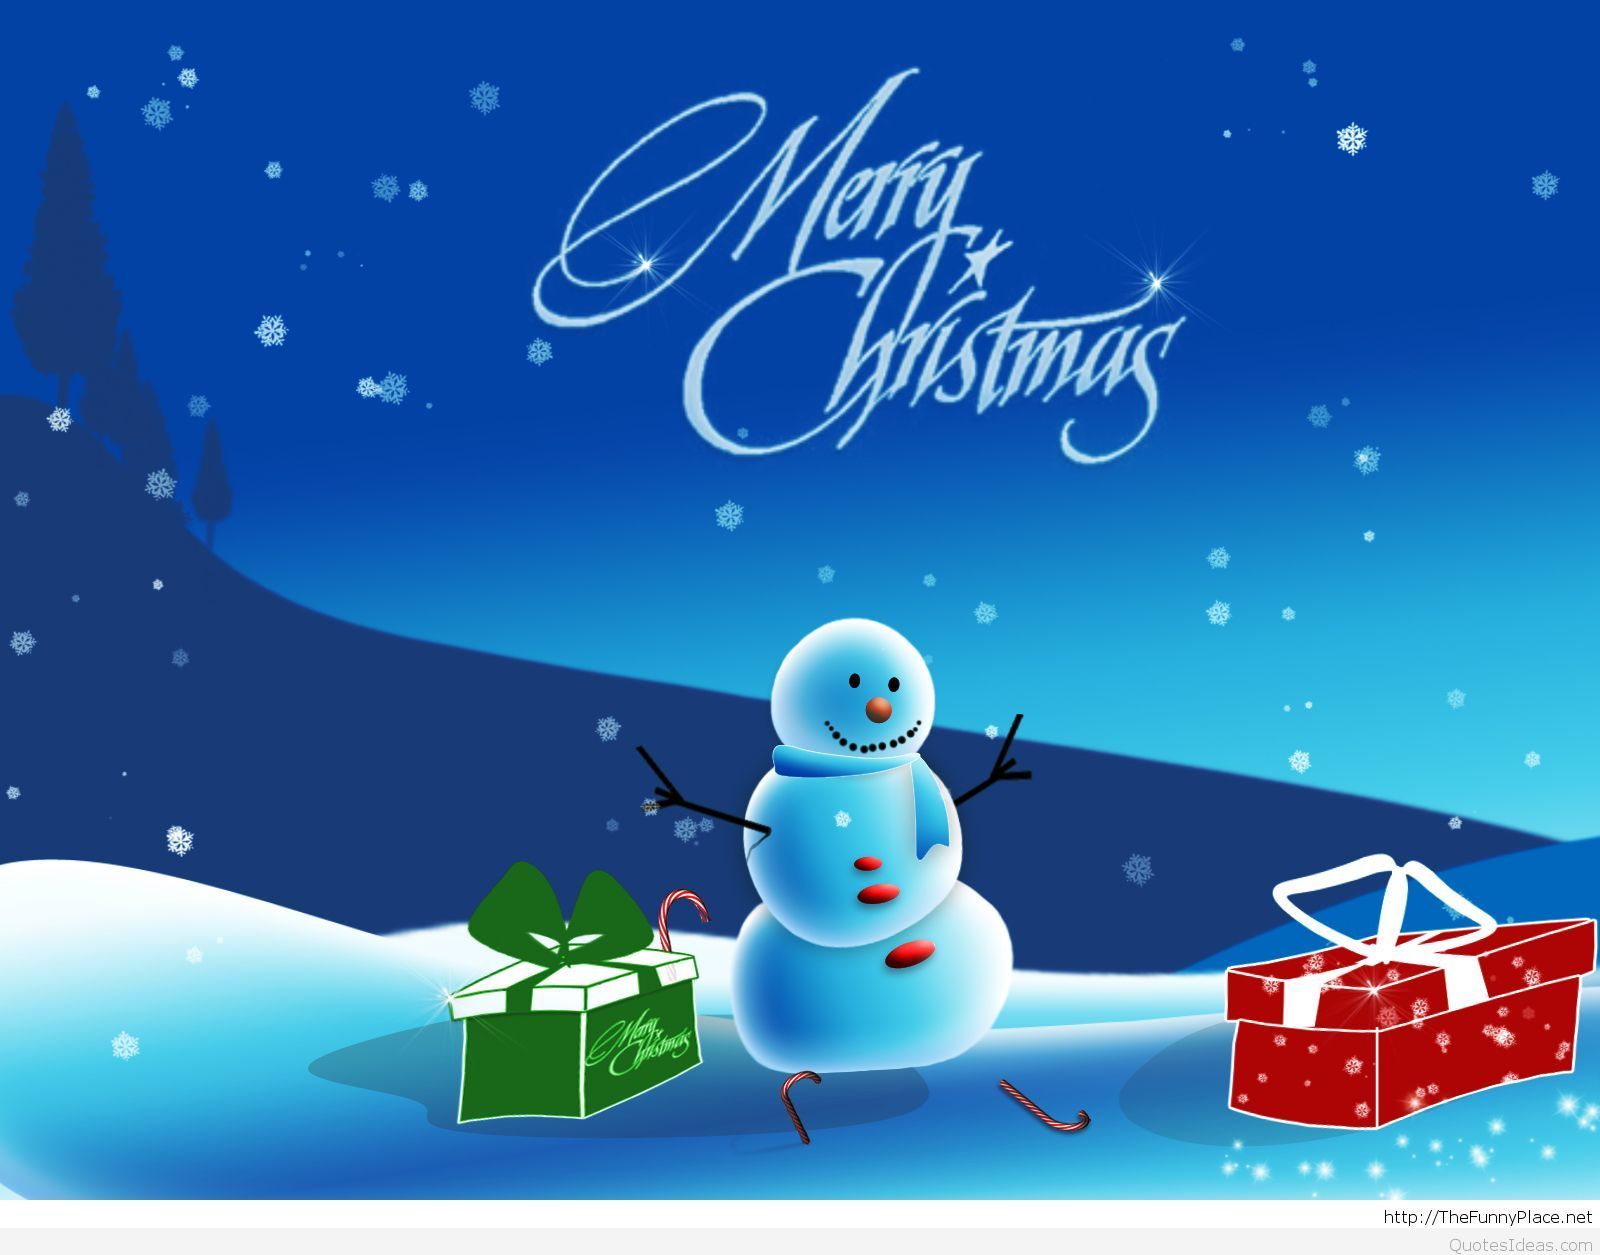 Merry Christmas Hd Wallpaper Wishes - Merry Christmas Images Hd , HD Wallpaper & Backgrounds